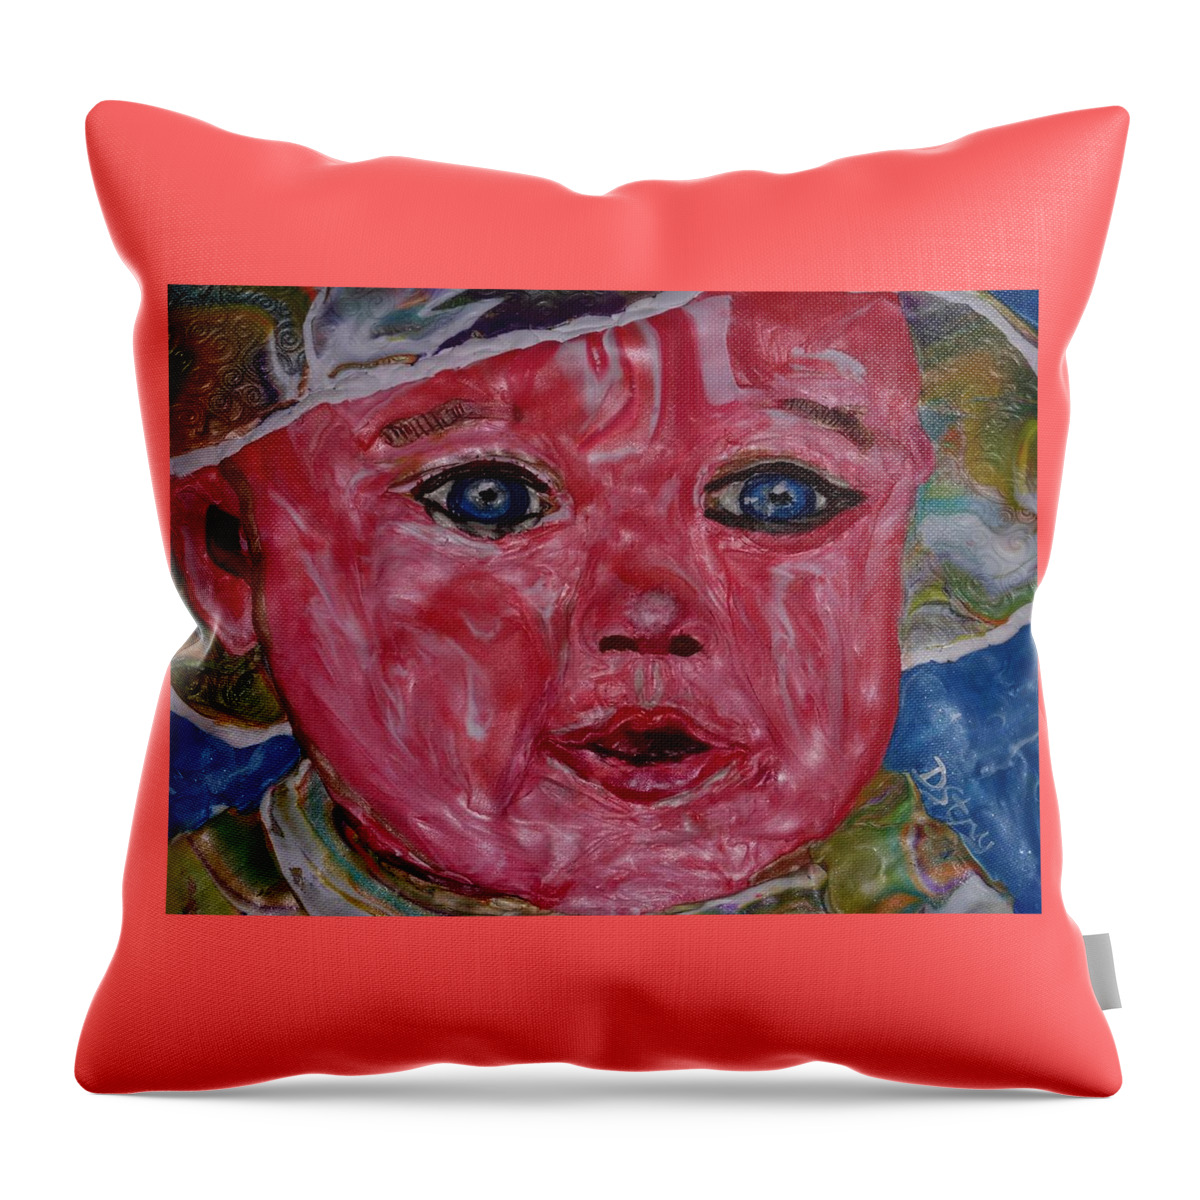 Female Throw Pillow featuring the mixed media Audrey by Deborah Stanley